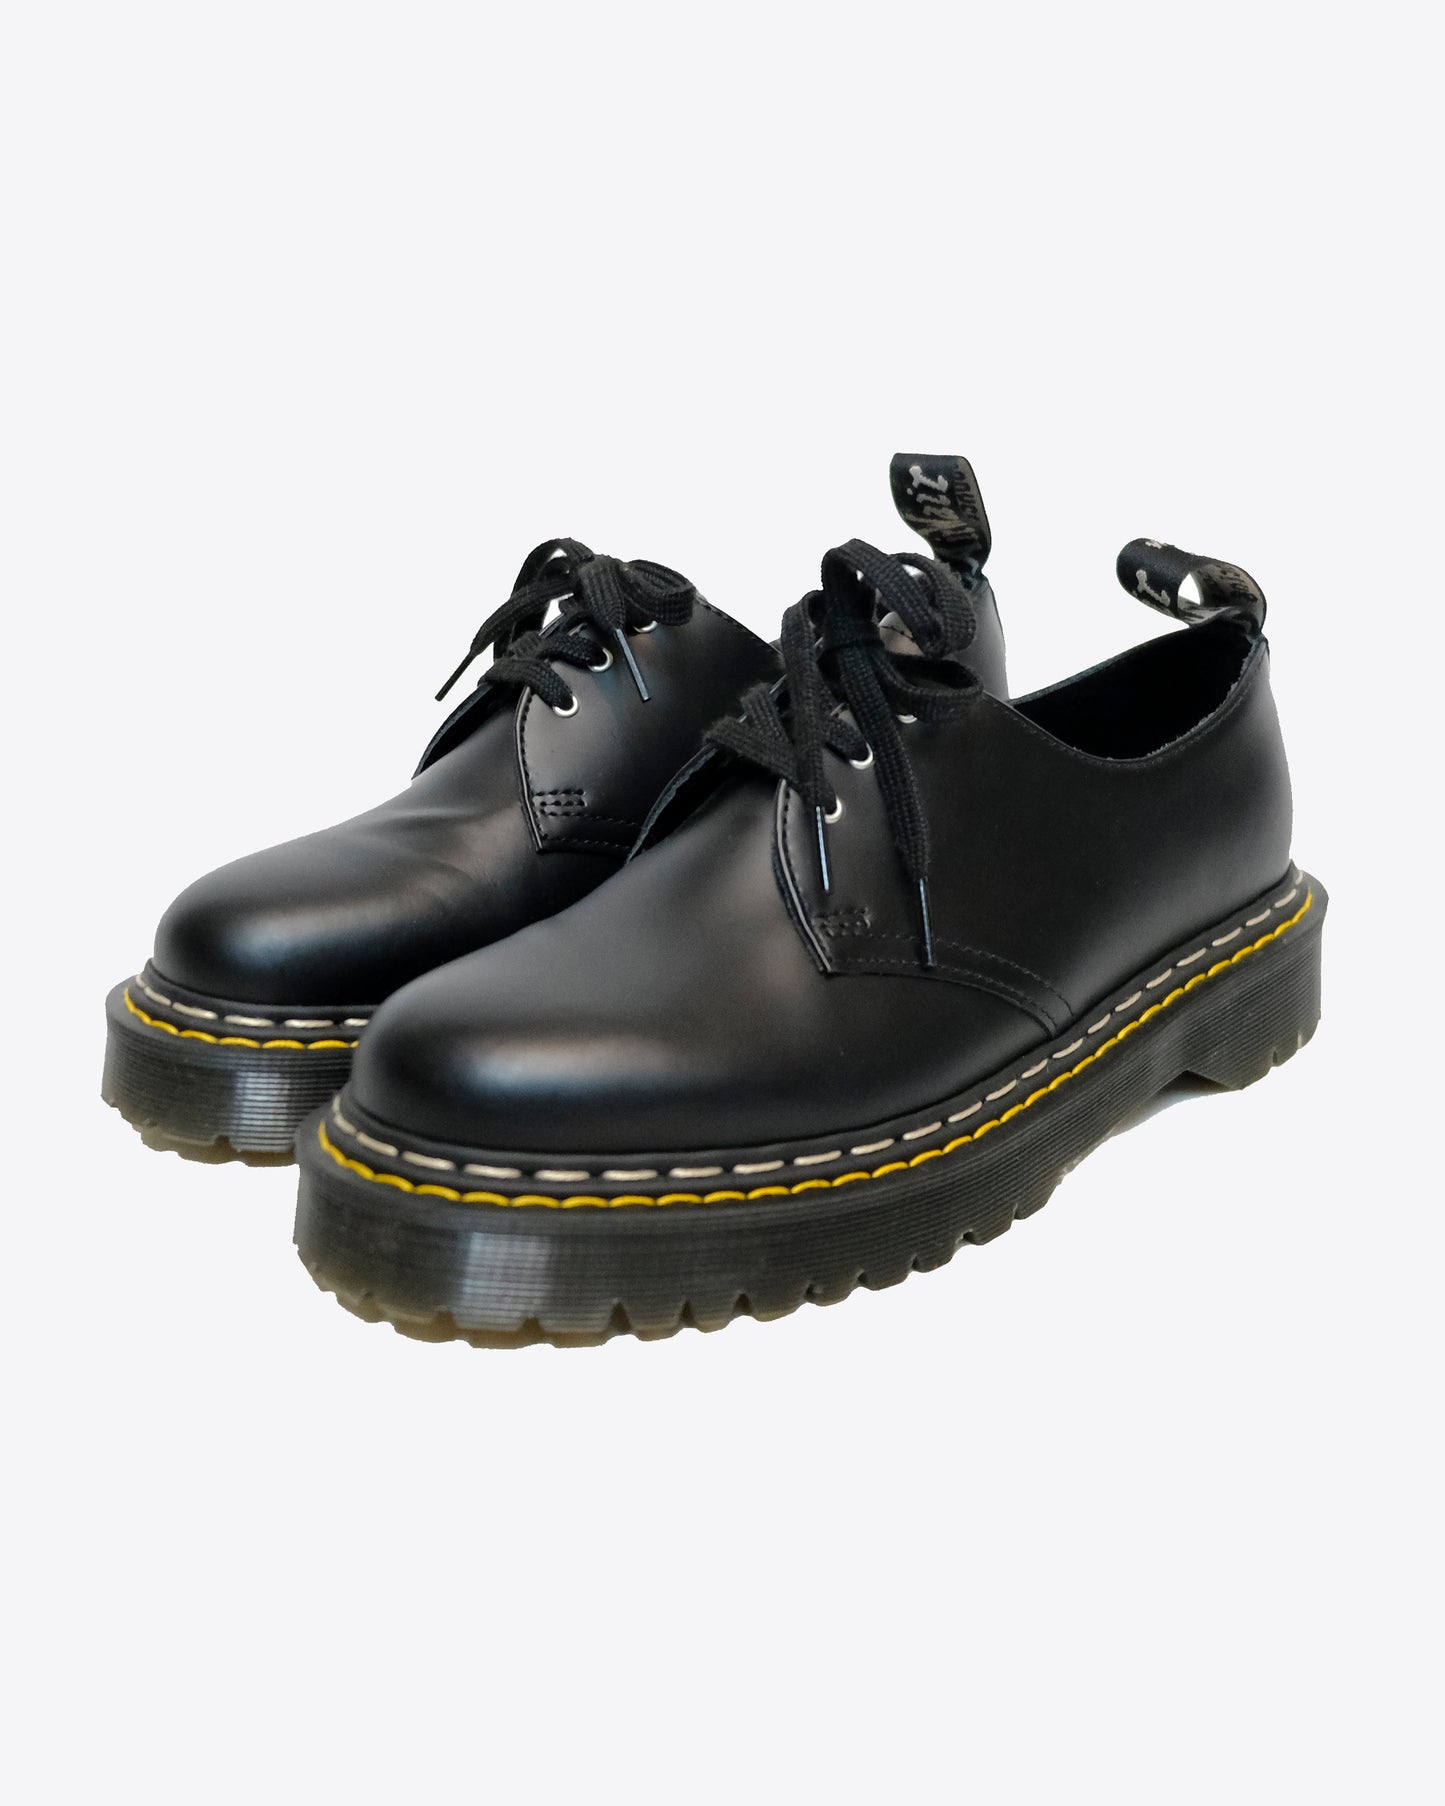 DR. MARTENS X RICK OWENS 42検討させていただきます